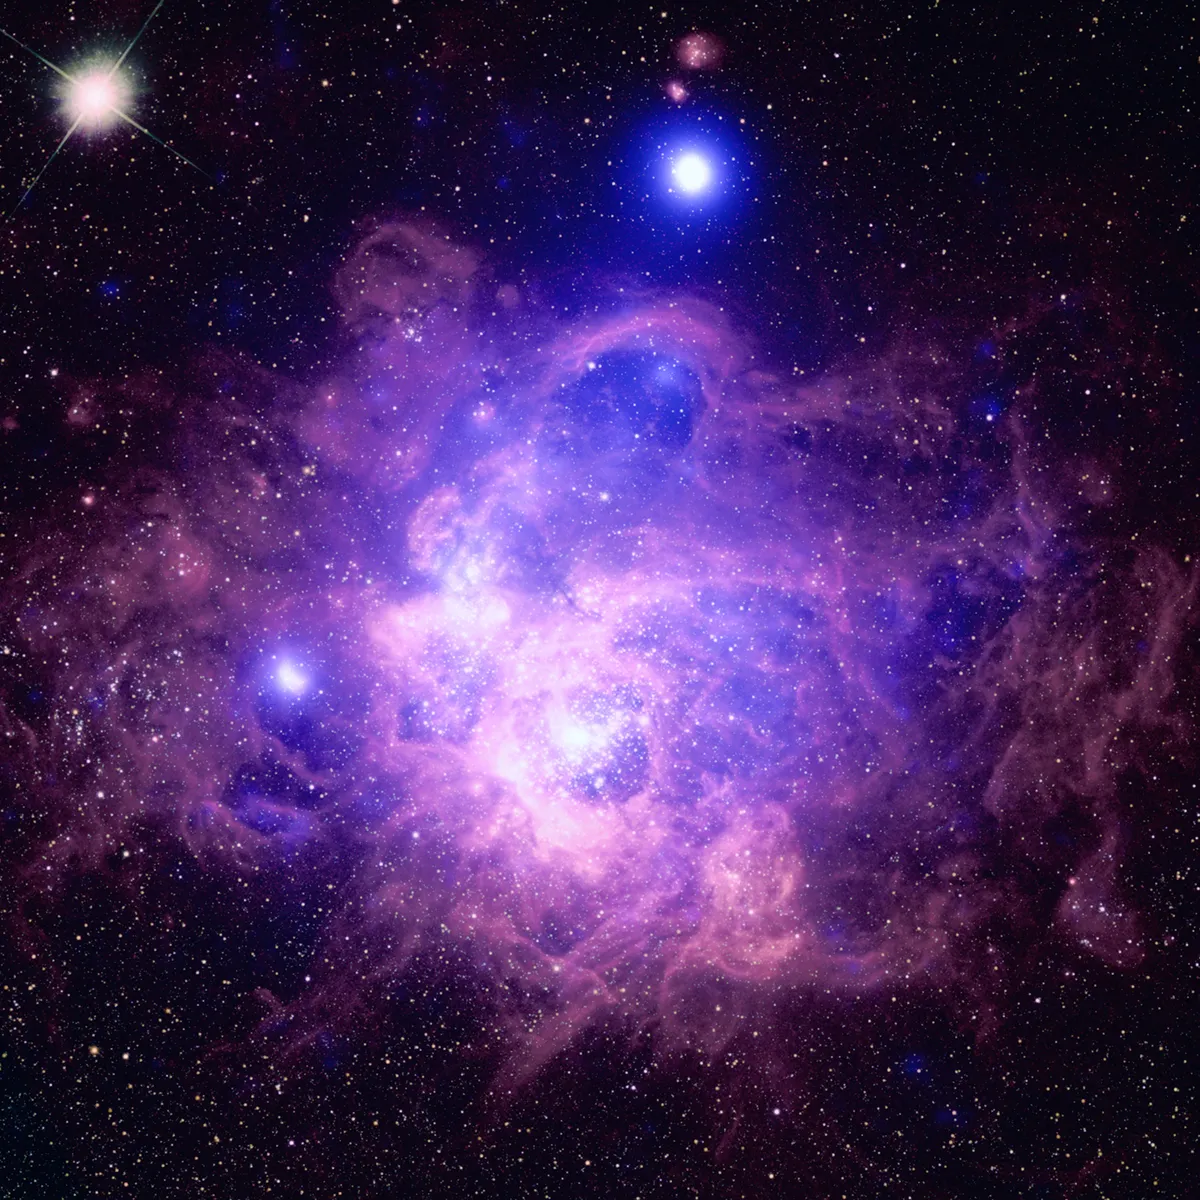 NGC 604 Star-forming region NGC 604 is contained within galaxy Messier 33. About 200 hot, young, massive stars live in this region. Credit: X-ray: NASA/CXC/Univ. of Arkansas/K. Garofali et al.; Optical: NASA/AURA/STScI/J. Schmidt